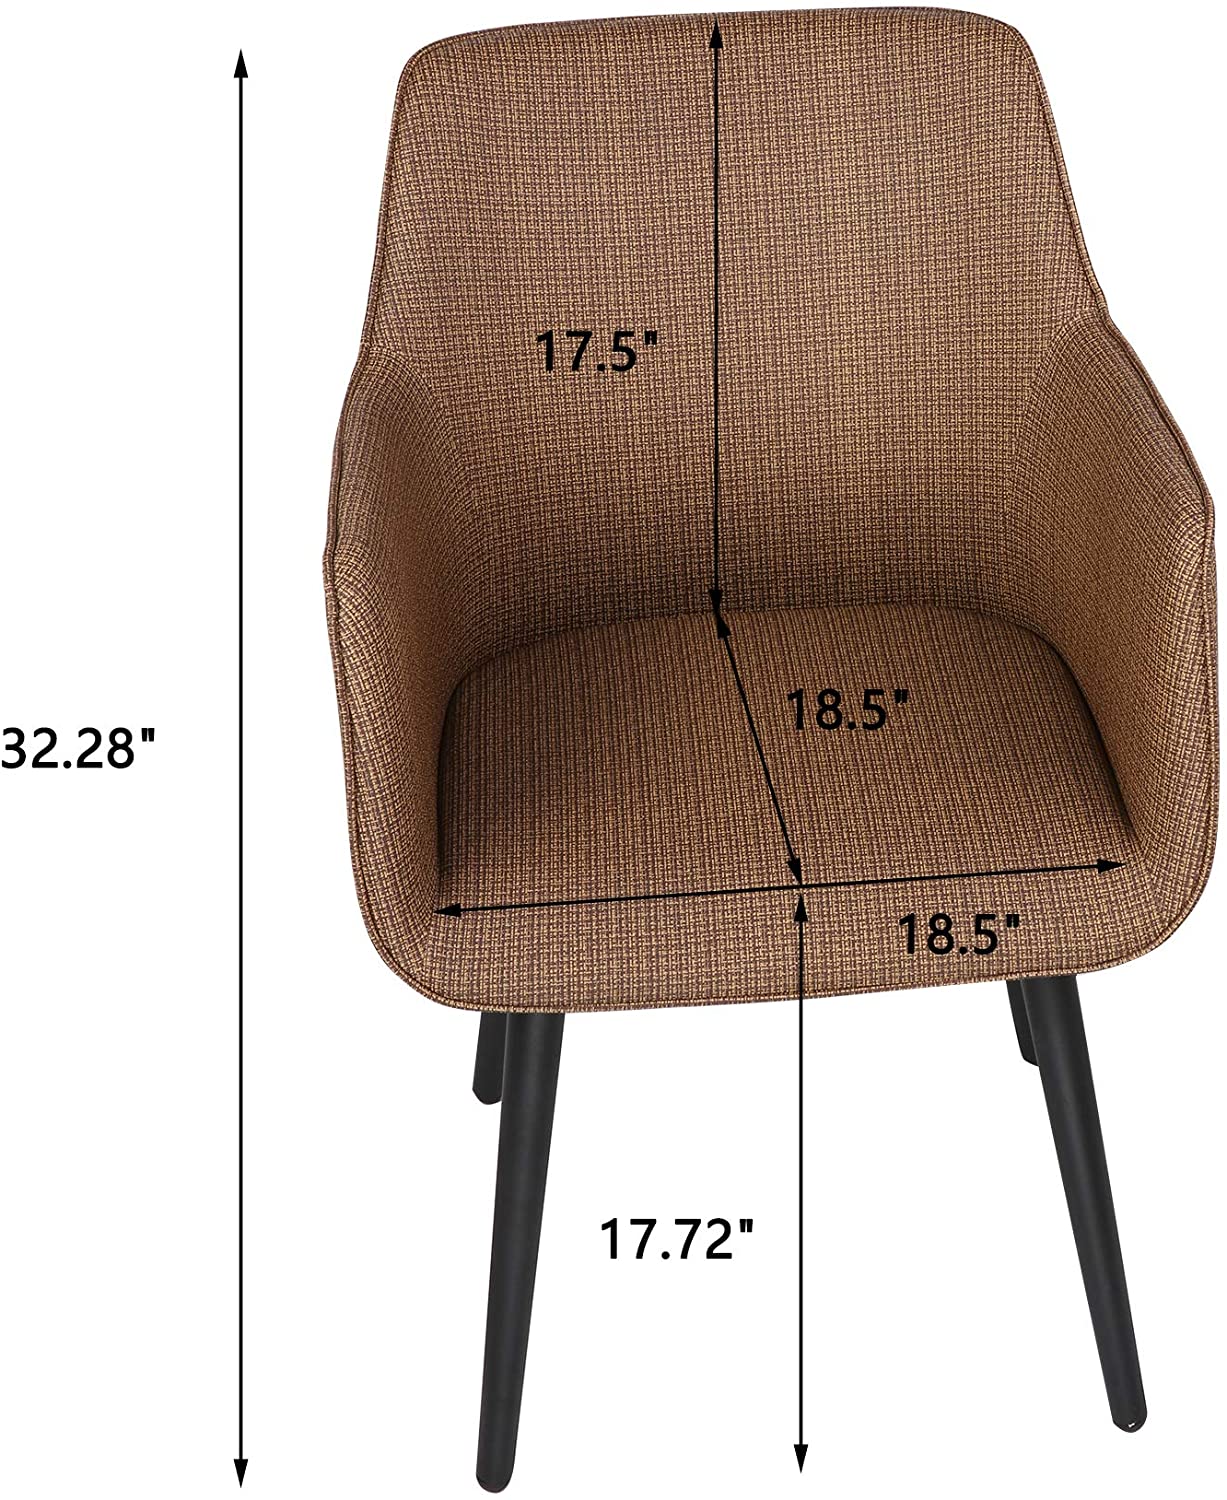 Elegant Italian Design Dining Chair, Metal Frame Armchair Set of 1, Comfortable and High Class Vinyl Seat Integrated in Ergonomic Stylish Frame, Dense Upholstered Foam, 400 lbs, Coffee